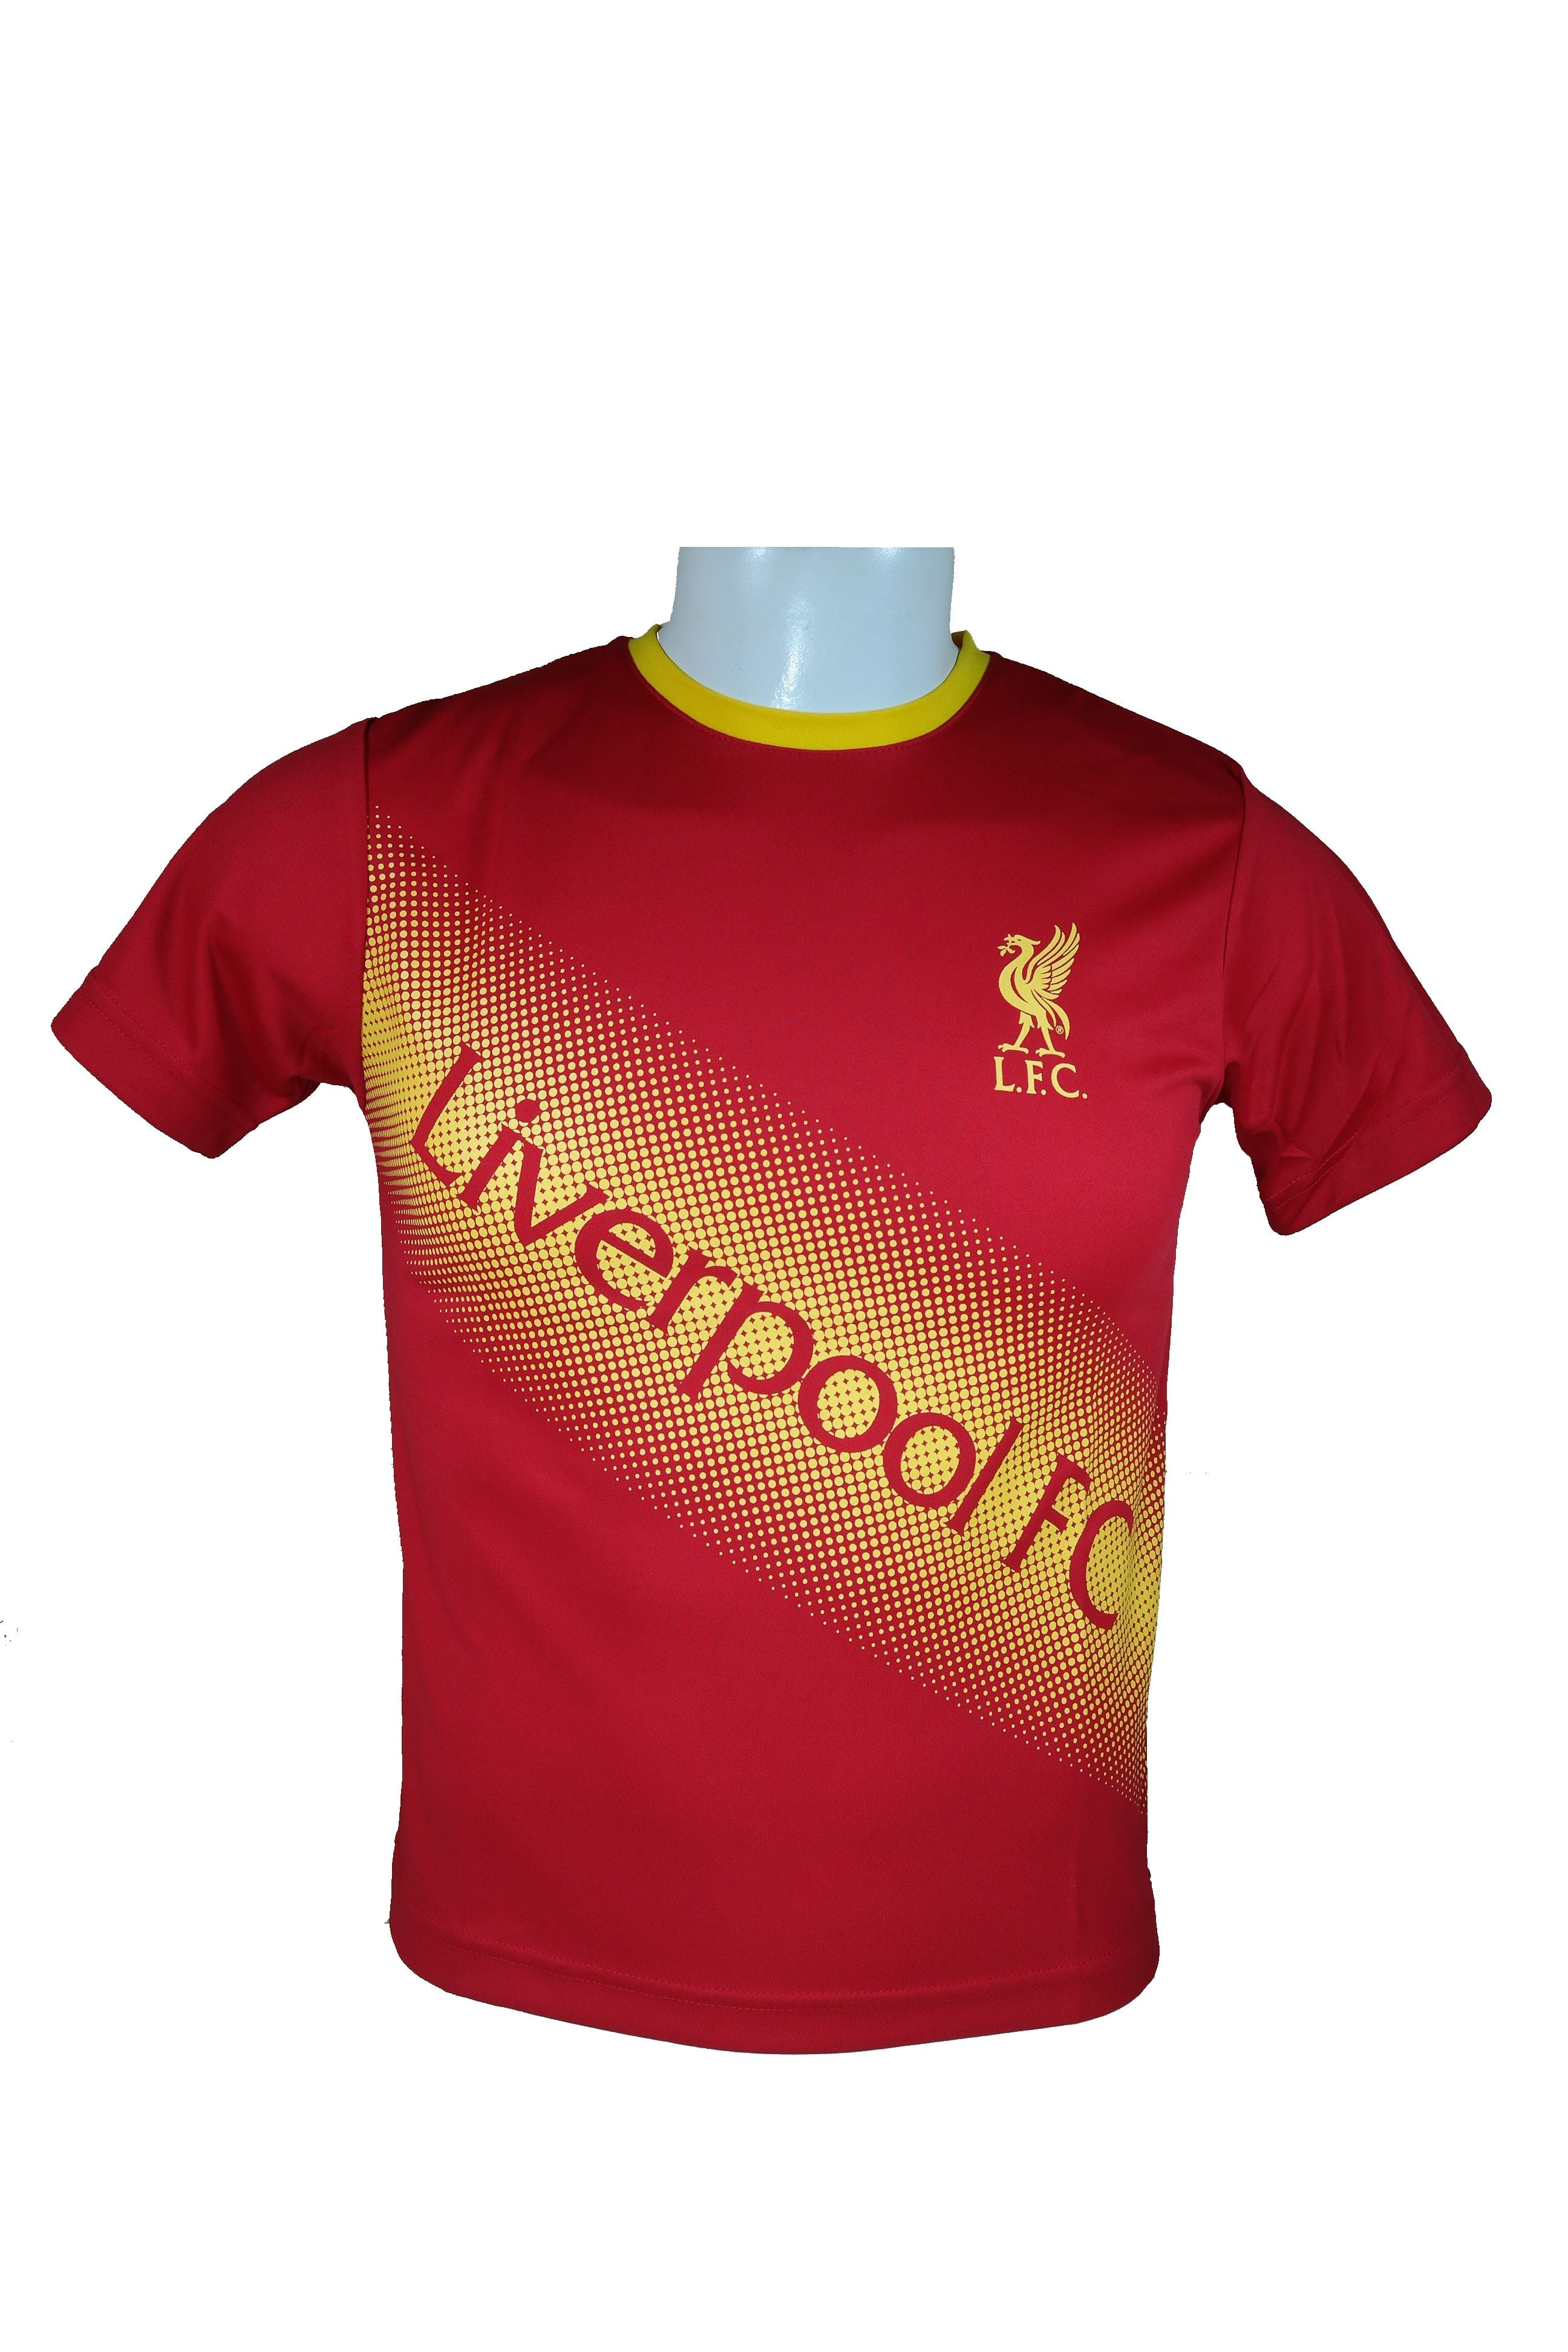 Soccer Official Adult Poly Jersey P013 L Liverpool F.C 